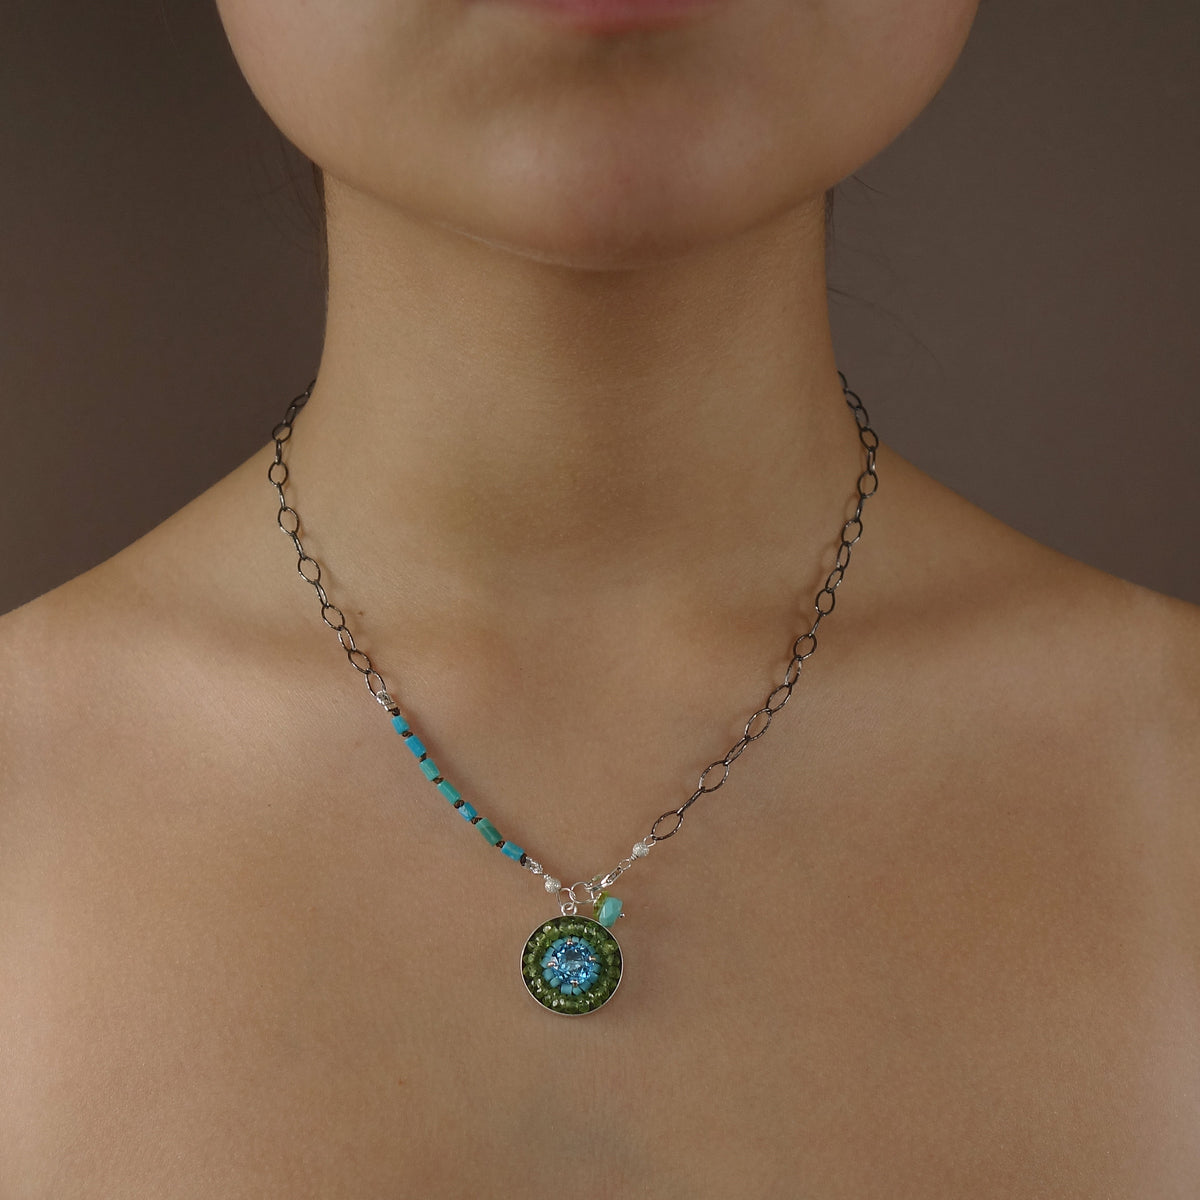 Inner Peace: topaz, peridot, and turquoise mosaic necklace